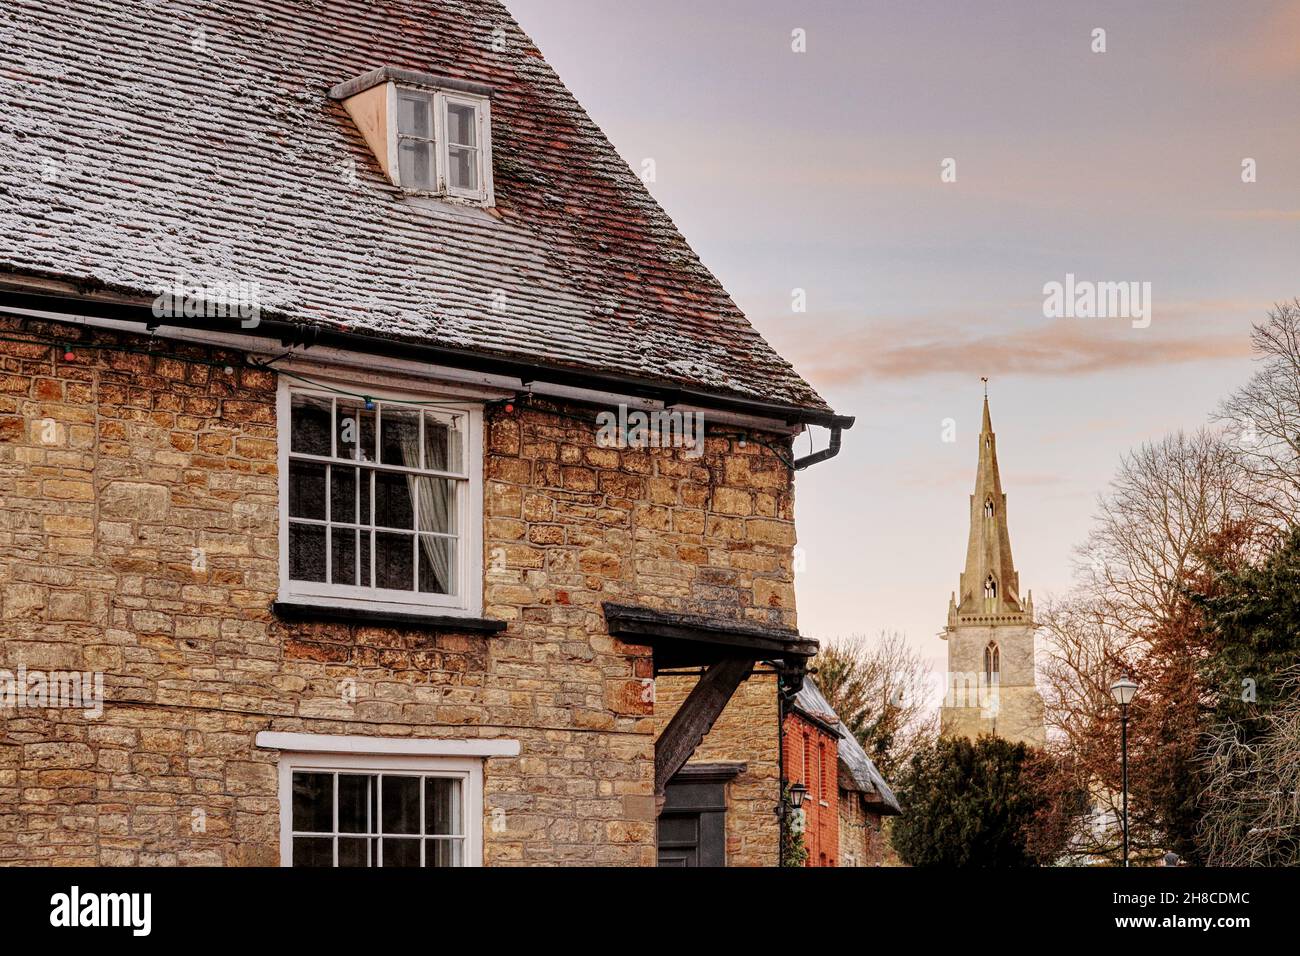 Sharnbrook High Street, Bedfordshire, England, UK - Winter scene at sunrise of old cottage with frost on roof and distant view of village church spire Stock Photo